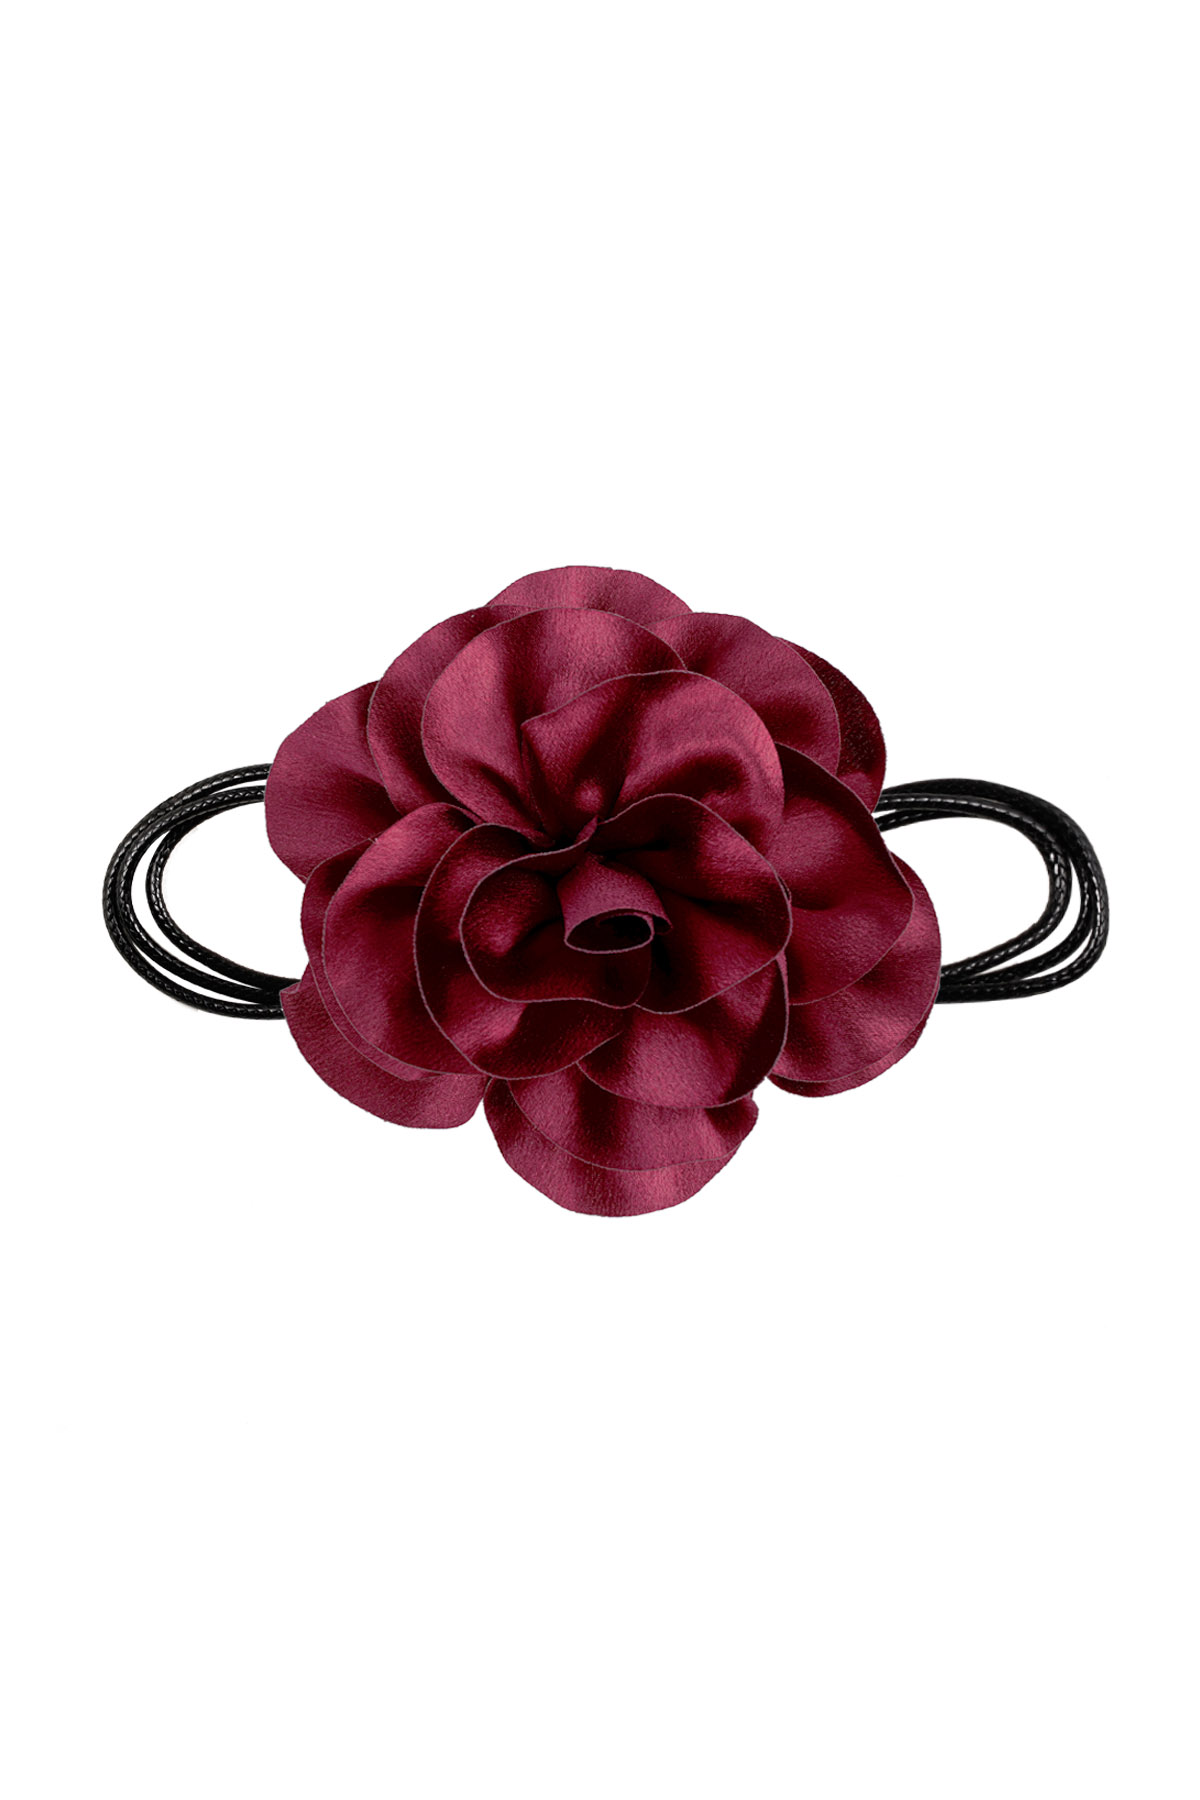 Necklace rope shiny flower - dark red h5 